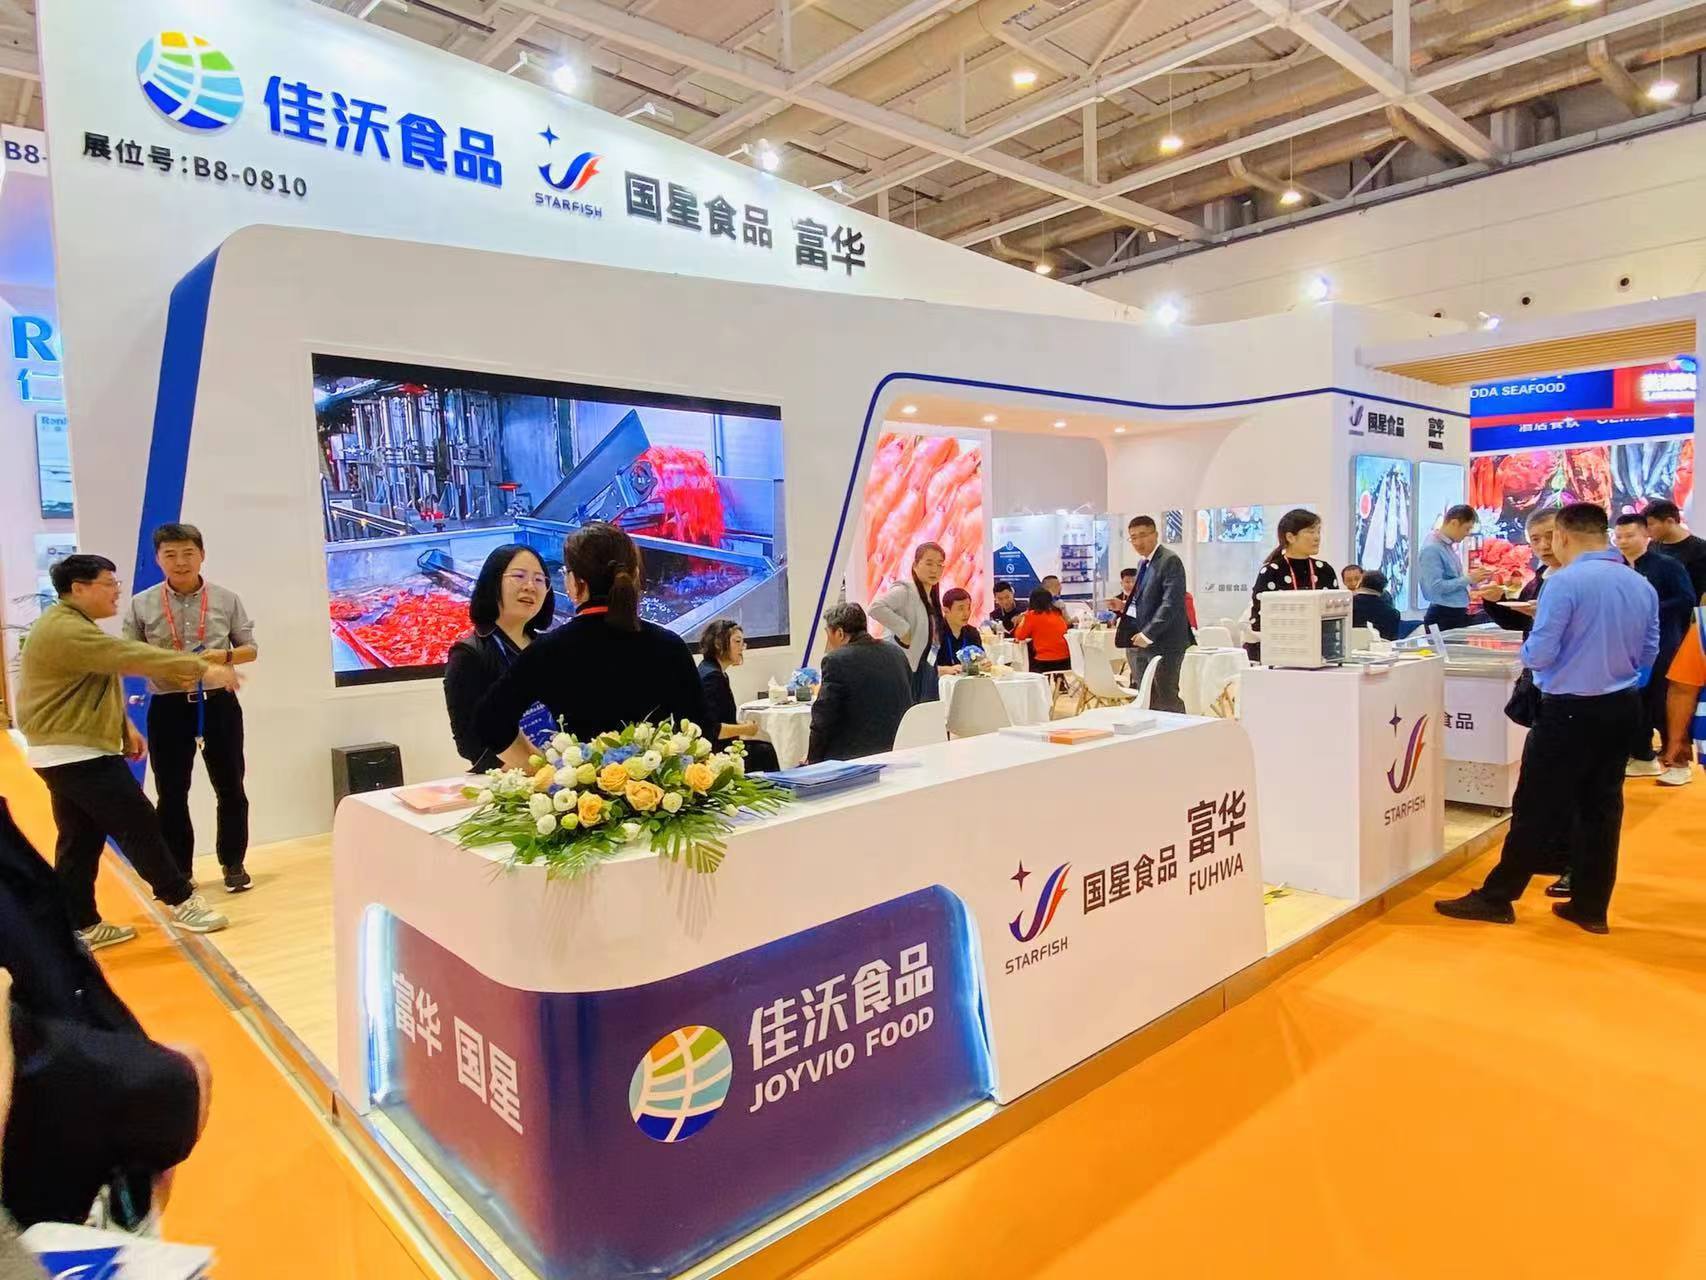 Joyvio Food participated in the 26th Qingdao Fishery Expo